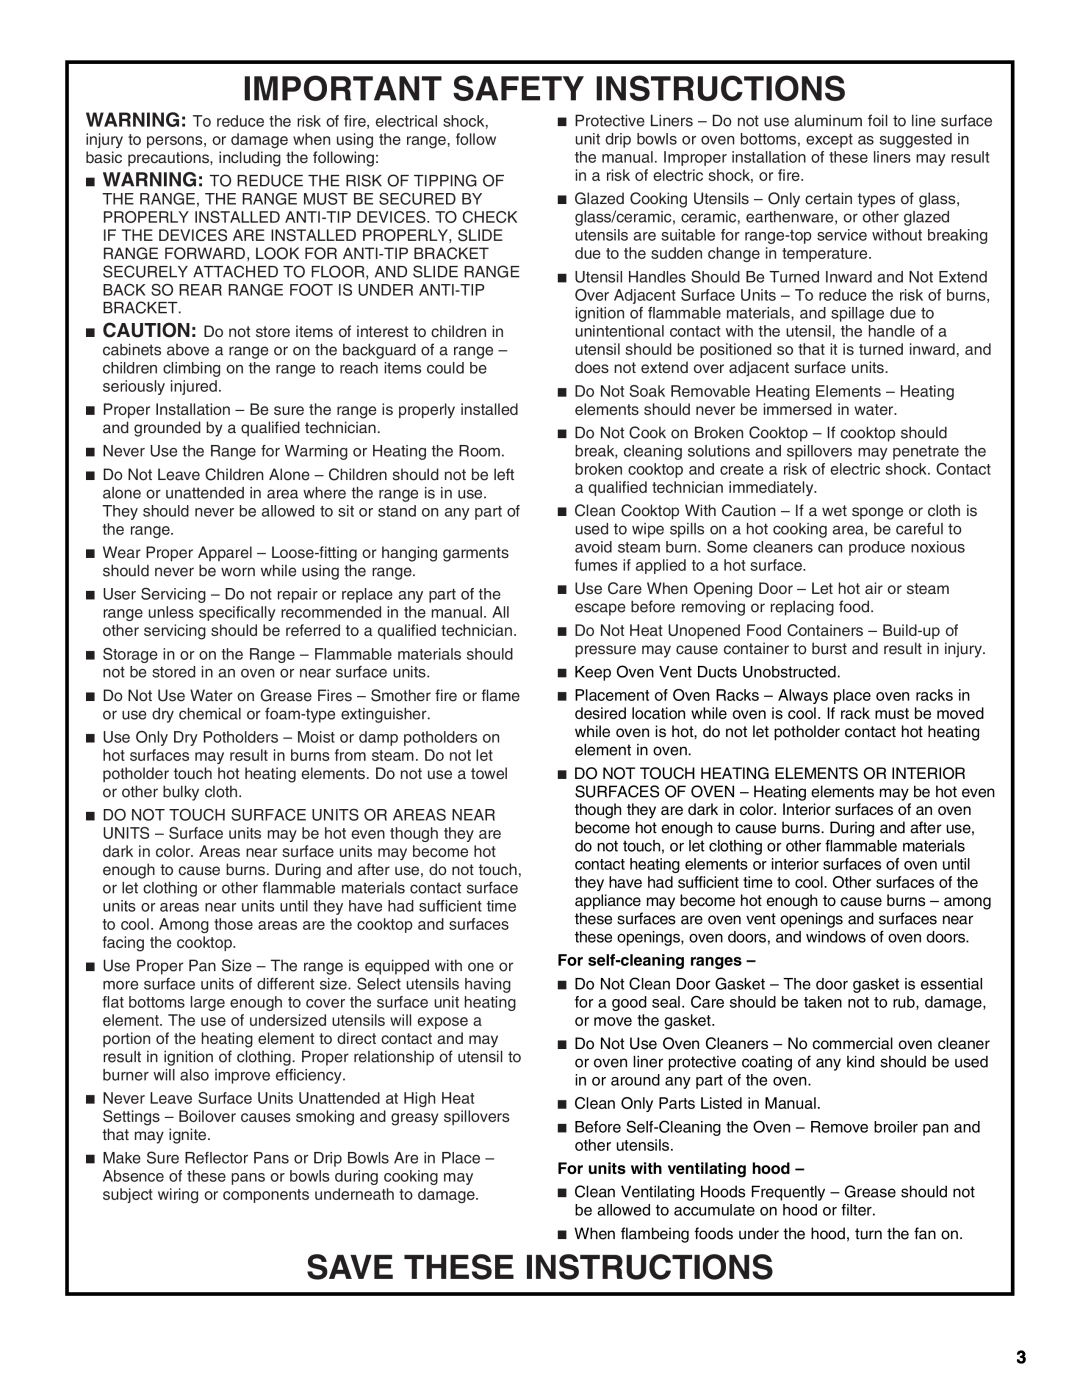 Amana AER5522VAW warranty Important Safety Instructions, Save These Instructions, For self-cleaning ranges 